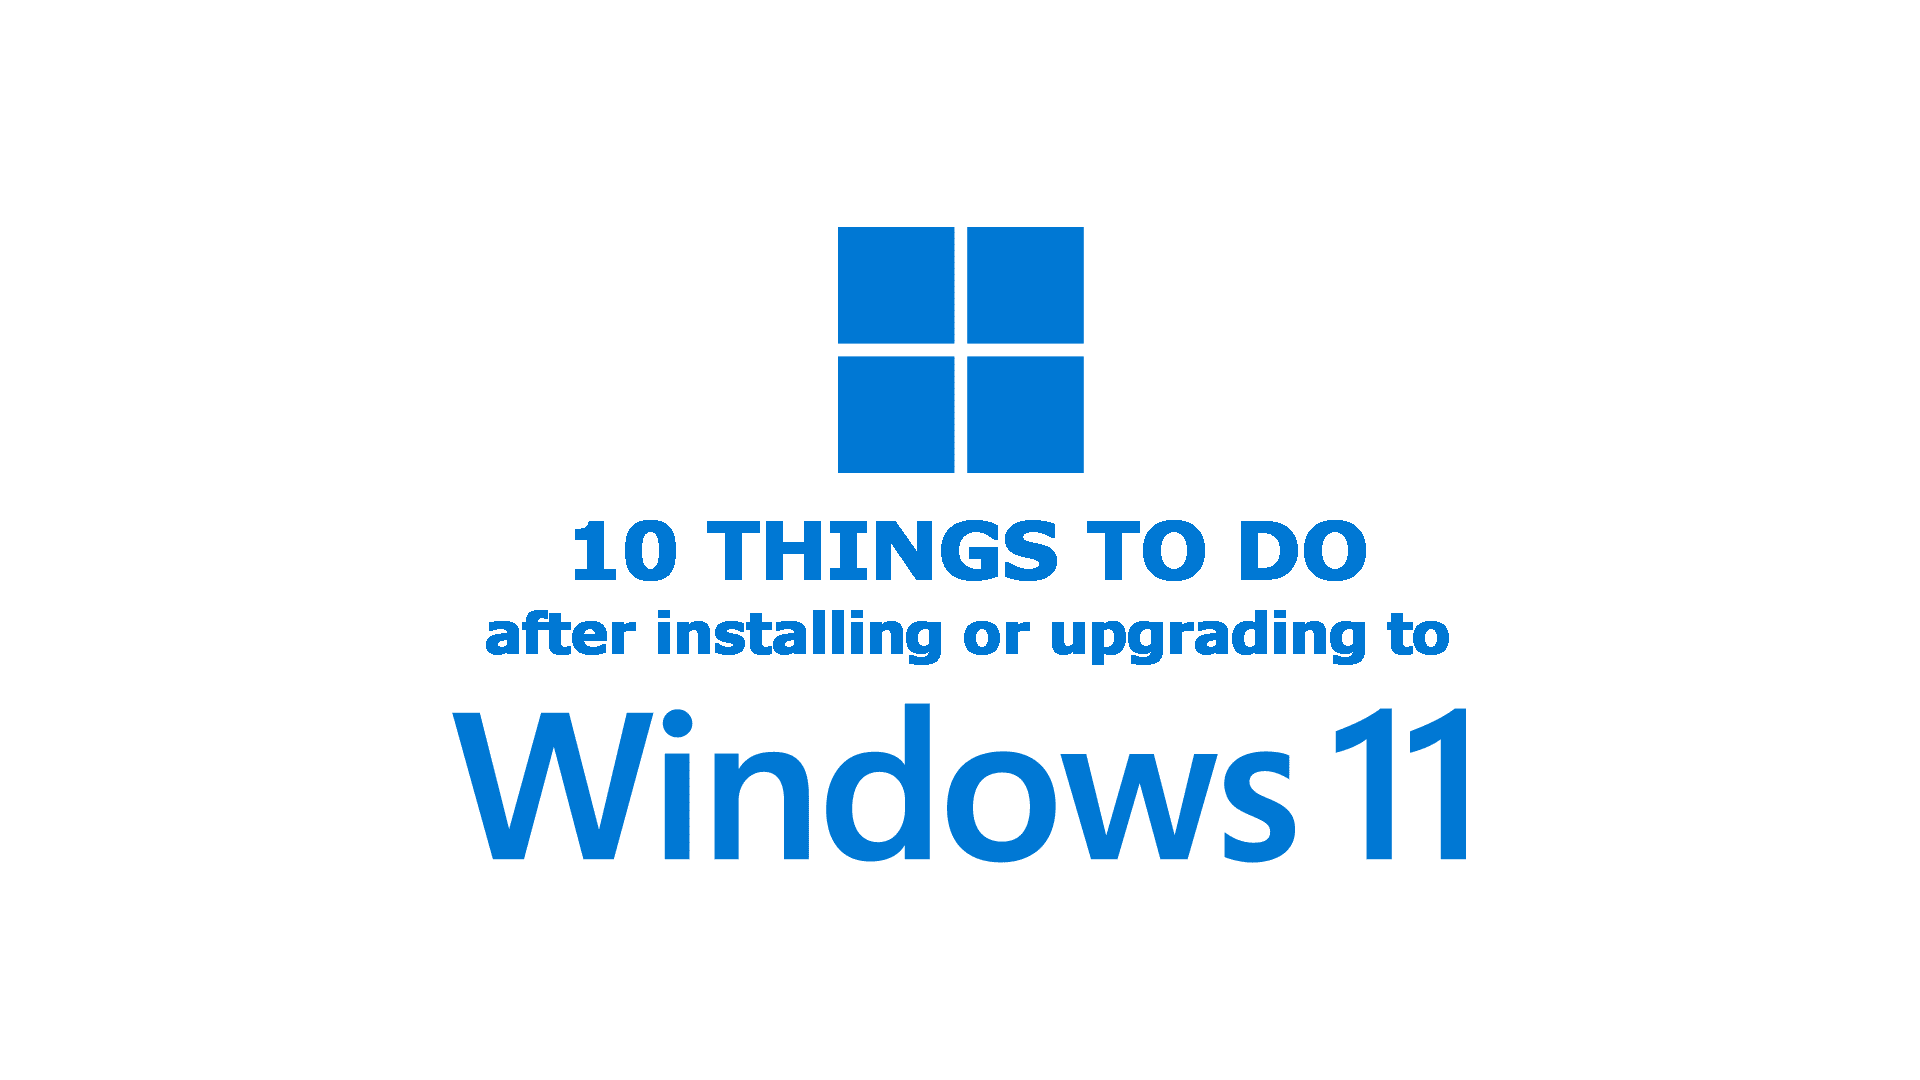 10 things to do after installing/upgrading to Windows 11 (+1)